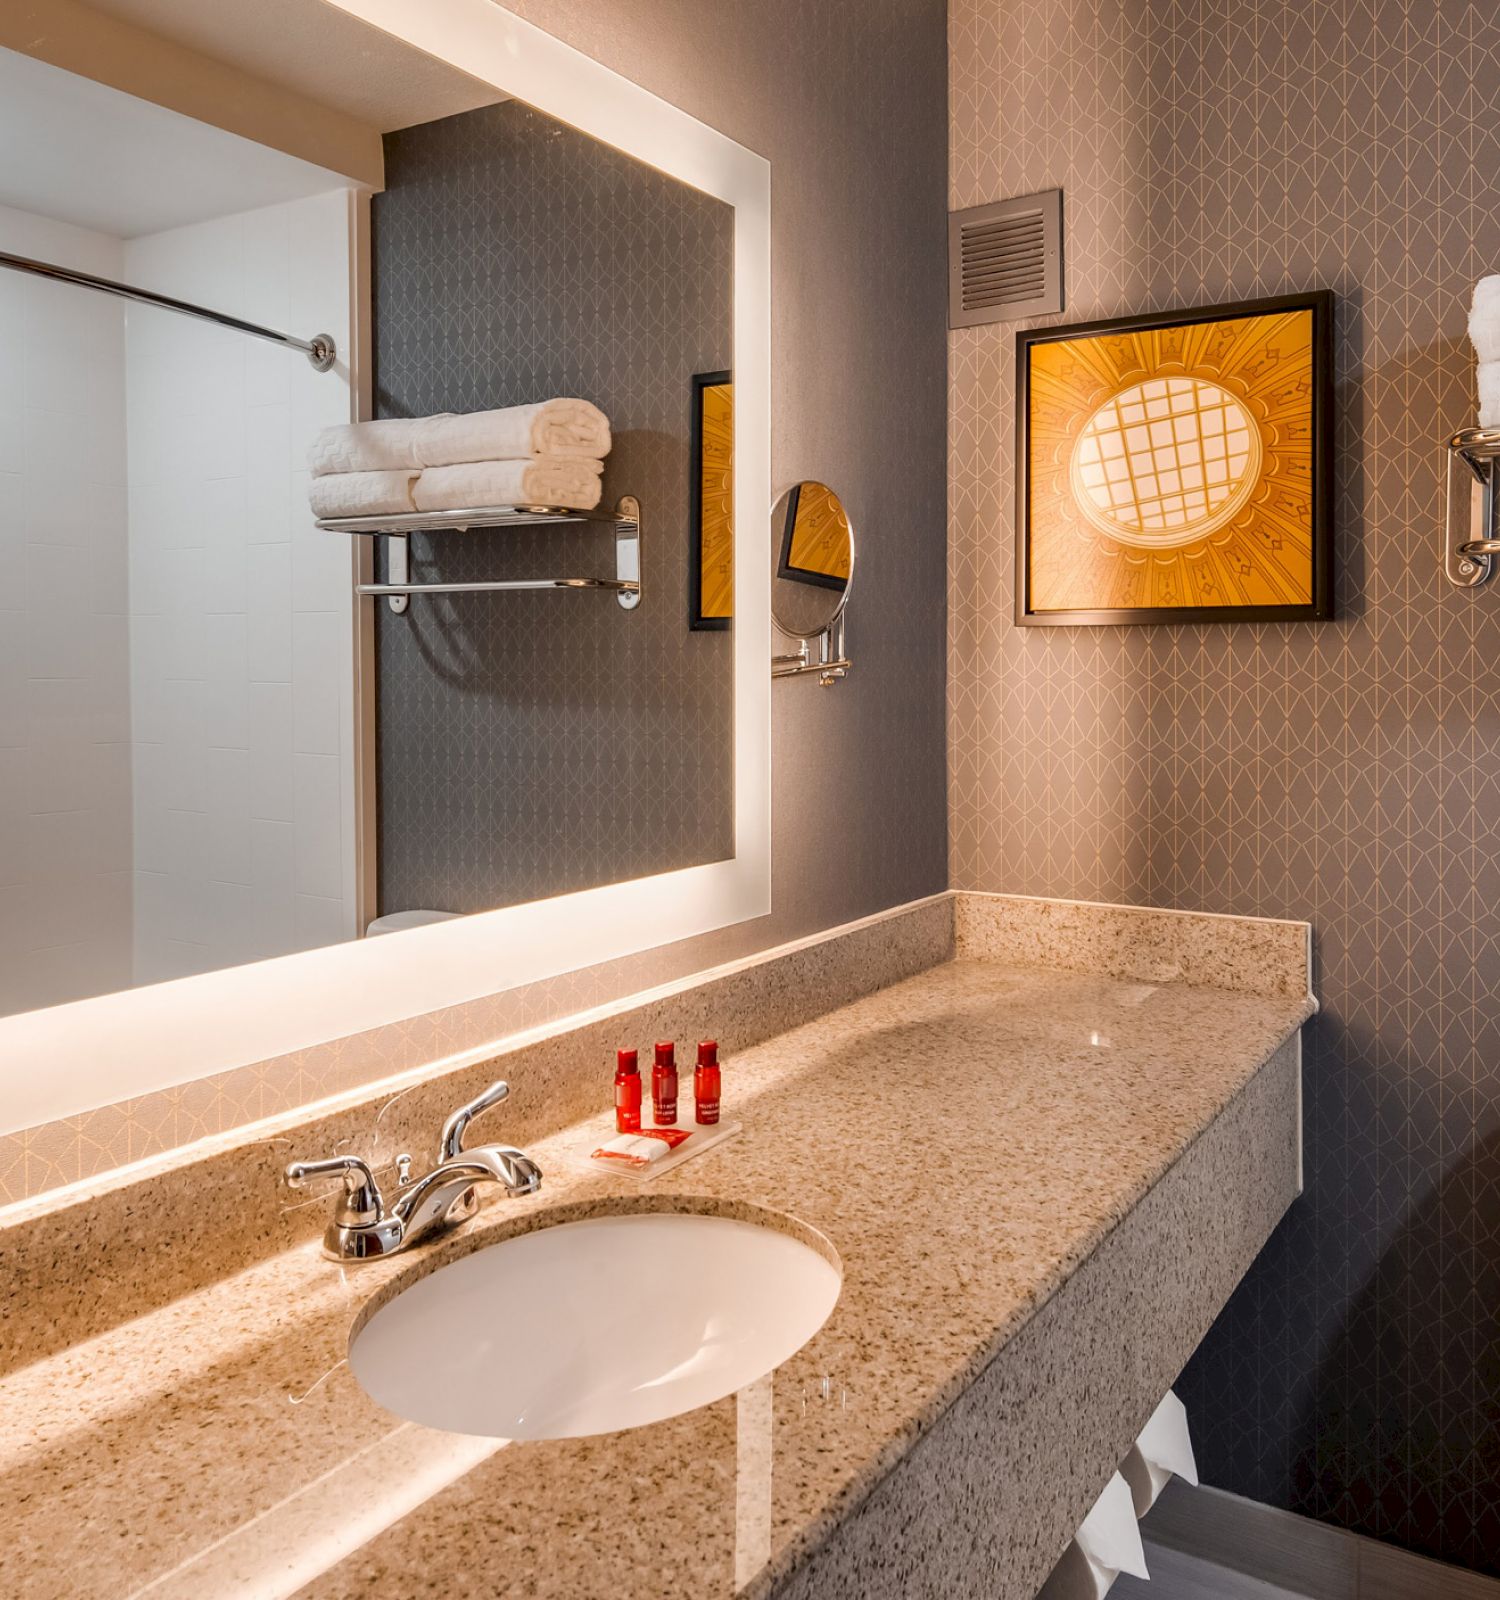 A modern bathroom featuring a large illuminated mirror, sink with red toiletries, toilet, towel rack with folded towels, and framed artwork.